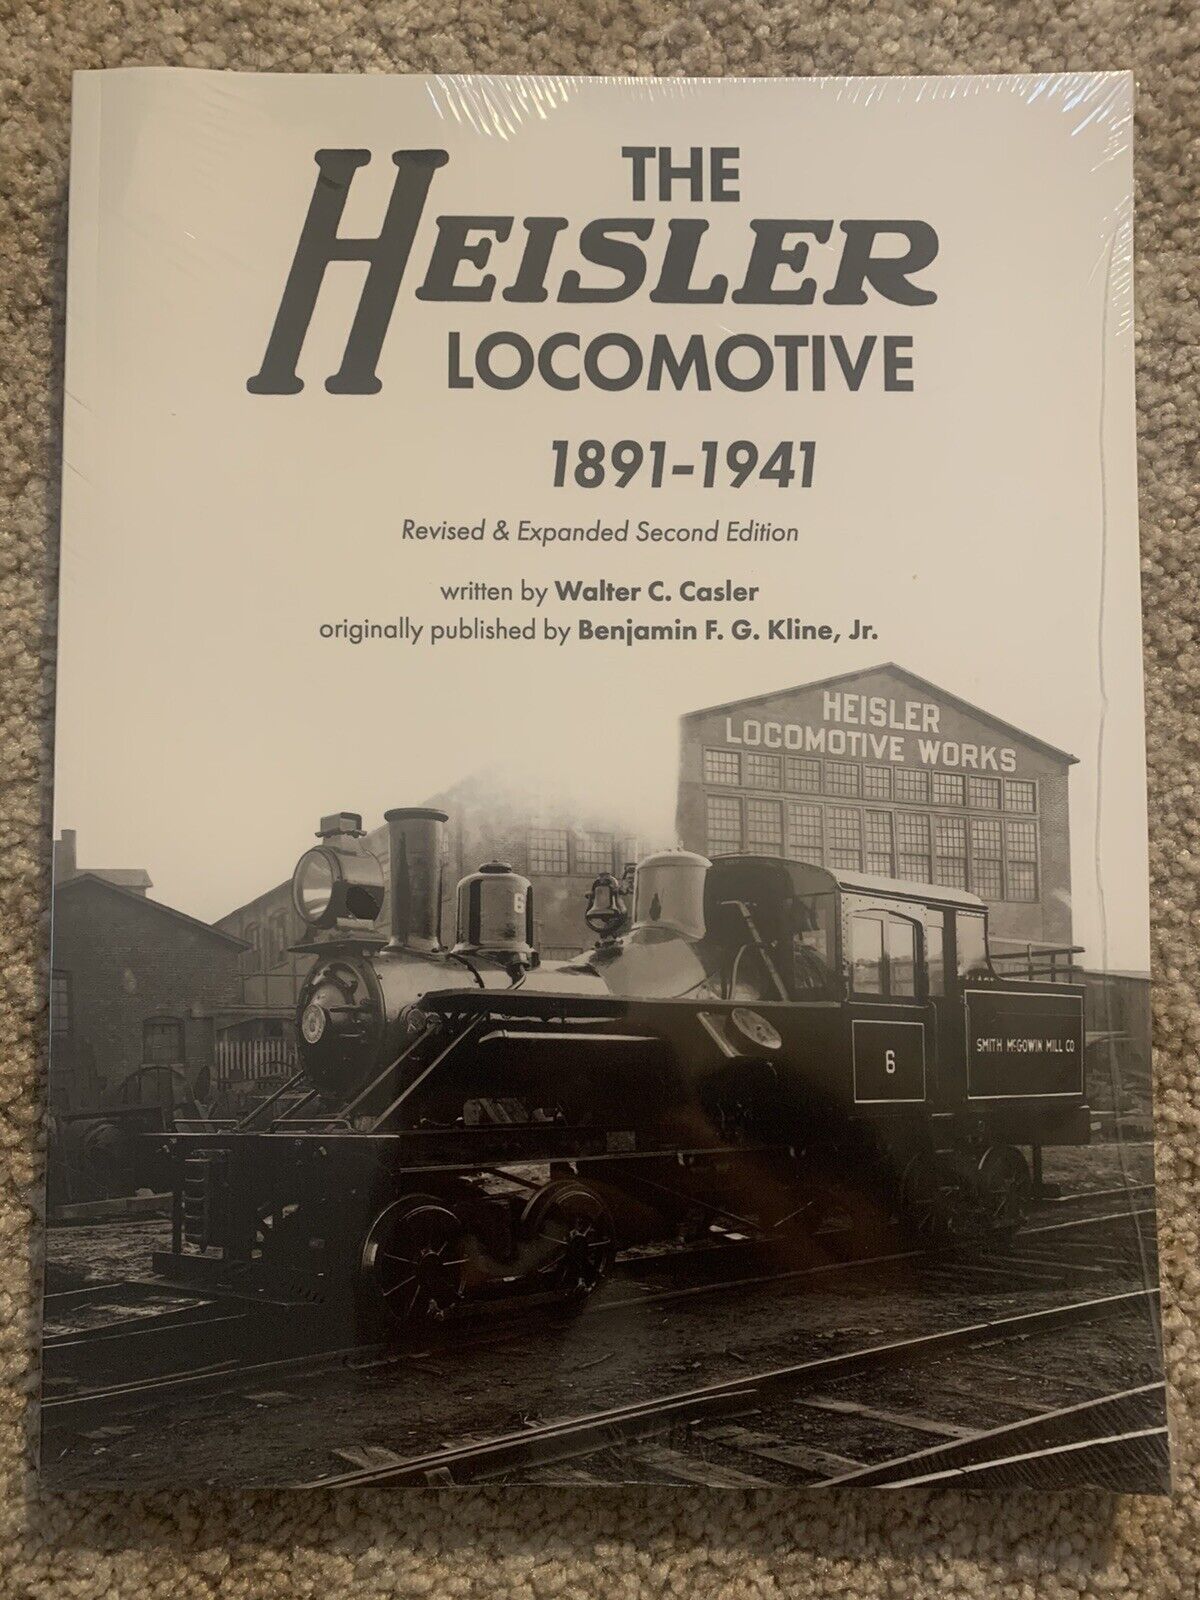 The Heisler Locomotive, 1891-1941 (Revised & Expanded Second Edition)